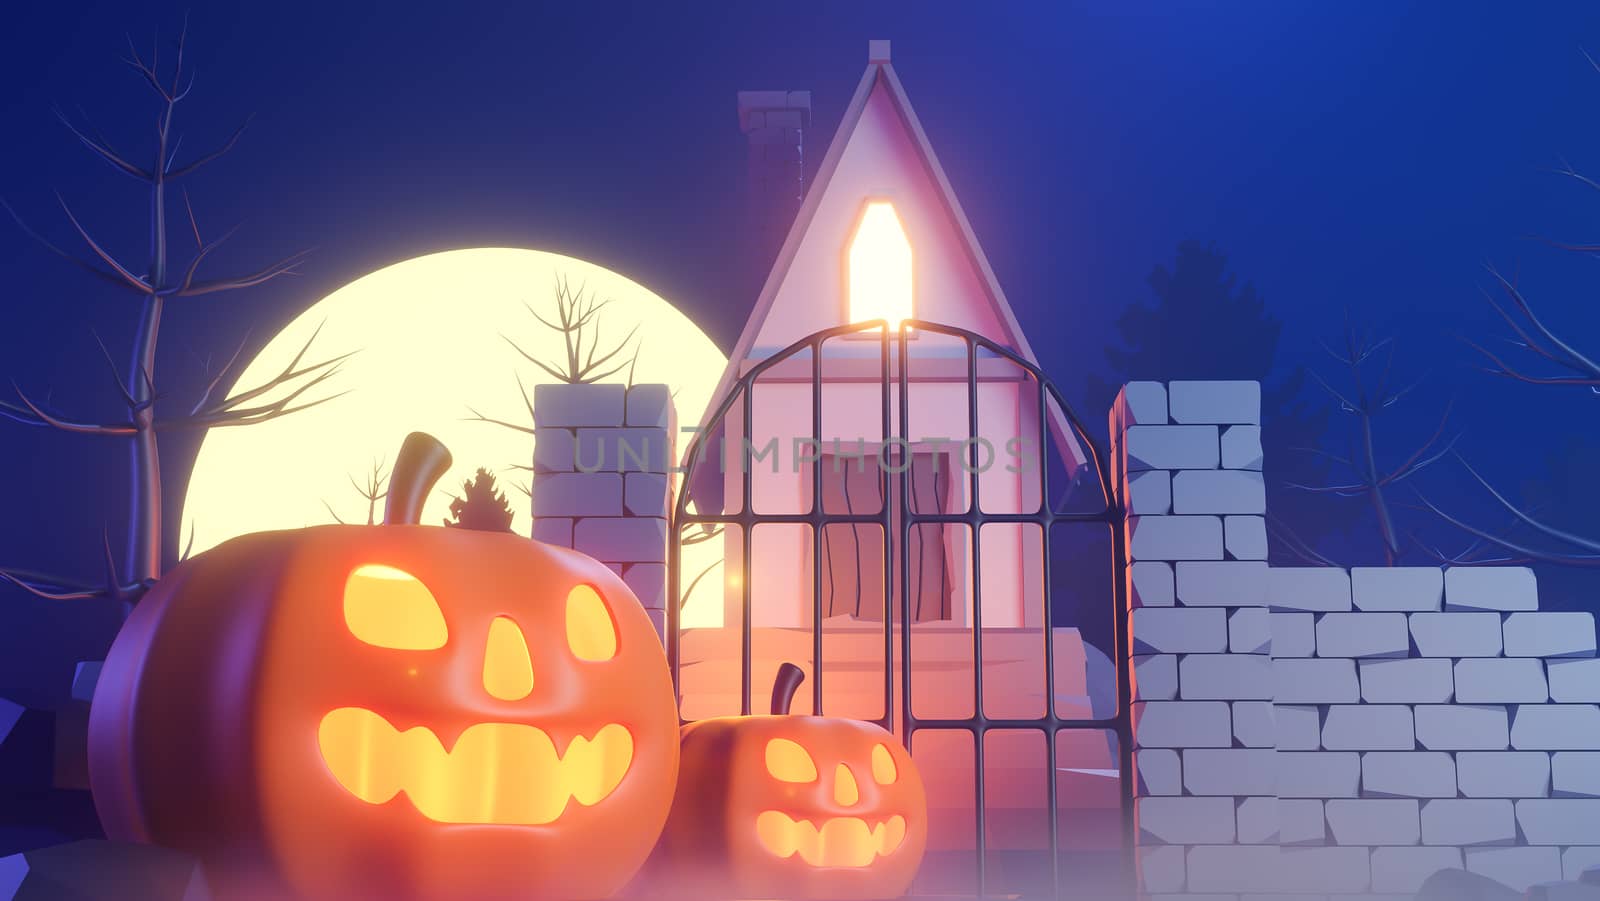 halloween theme with pumpkins and a house at night.,3d model and illustration.